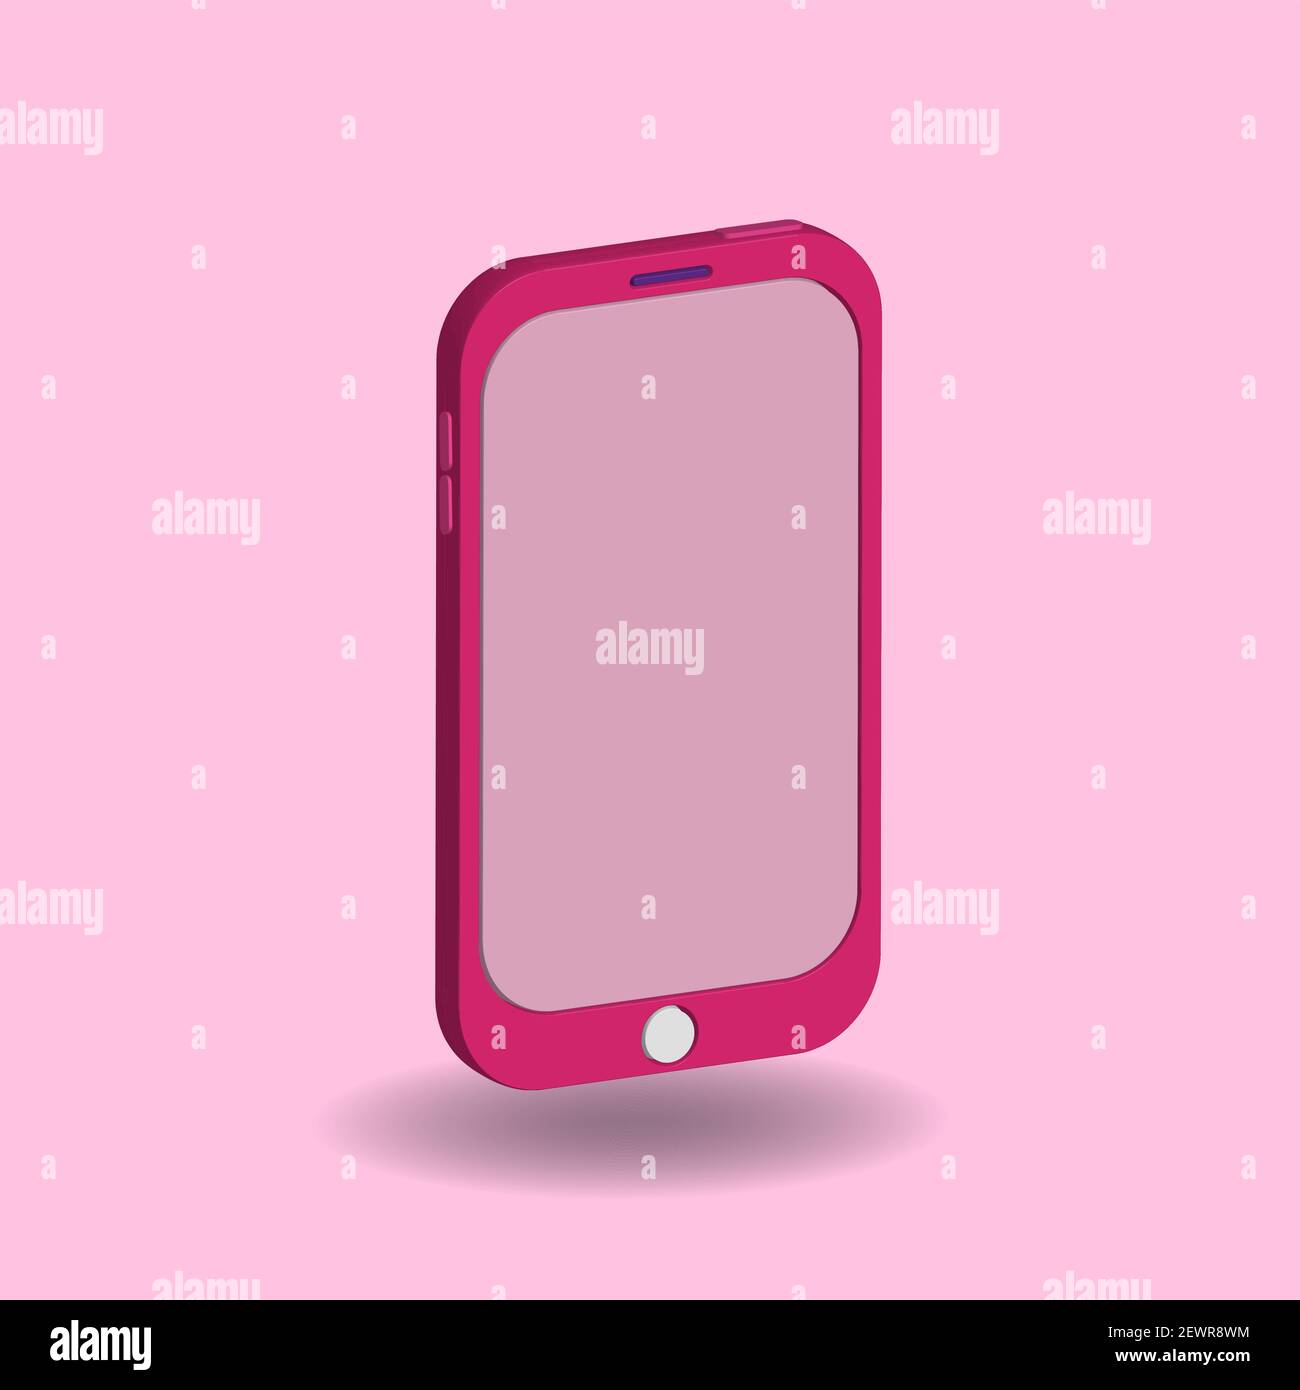 Pink cellular phone isolated on pastel background. 3D Cartoon vector illustration for design element. cute, girly, minimalism, trendy, fashionable. Stock Vector